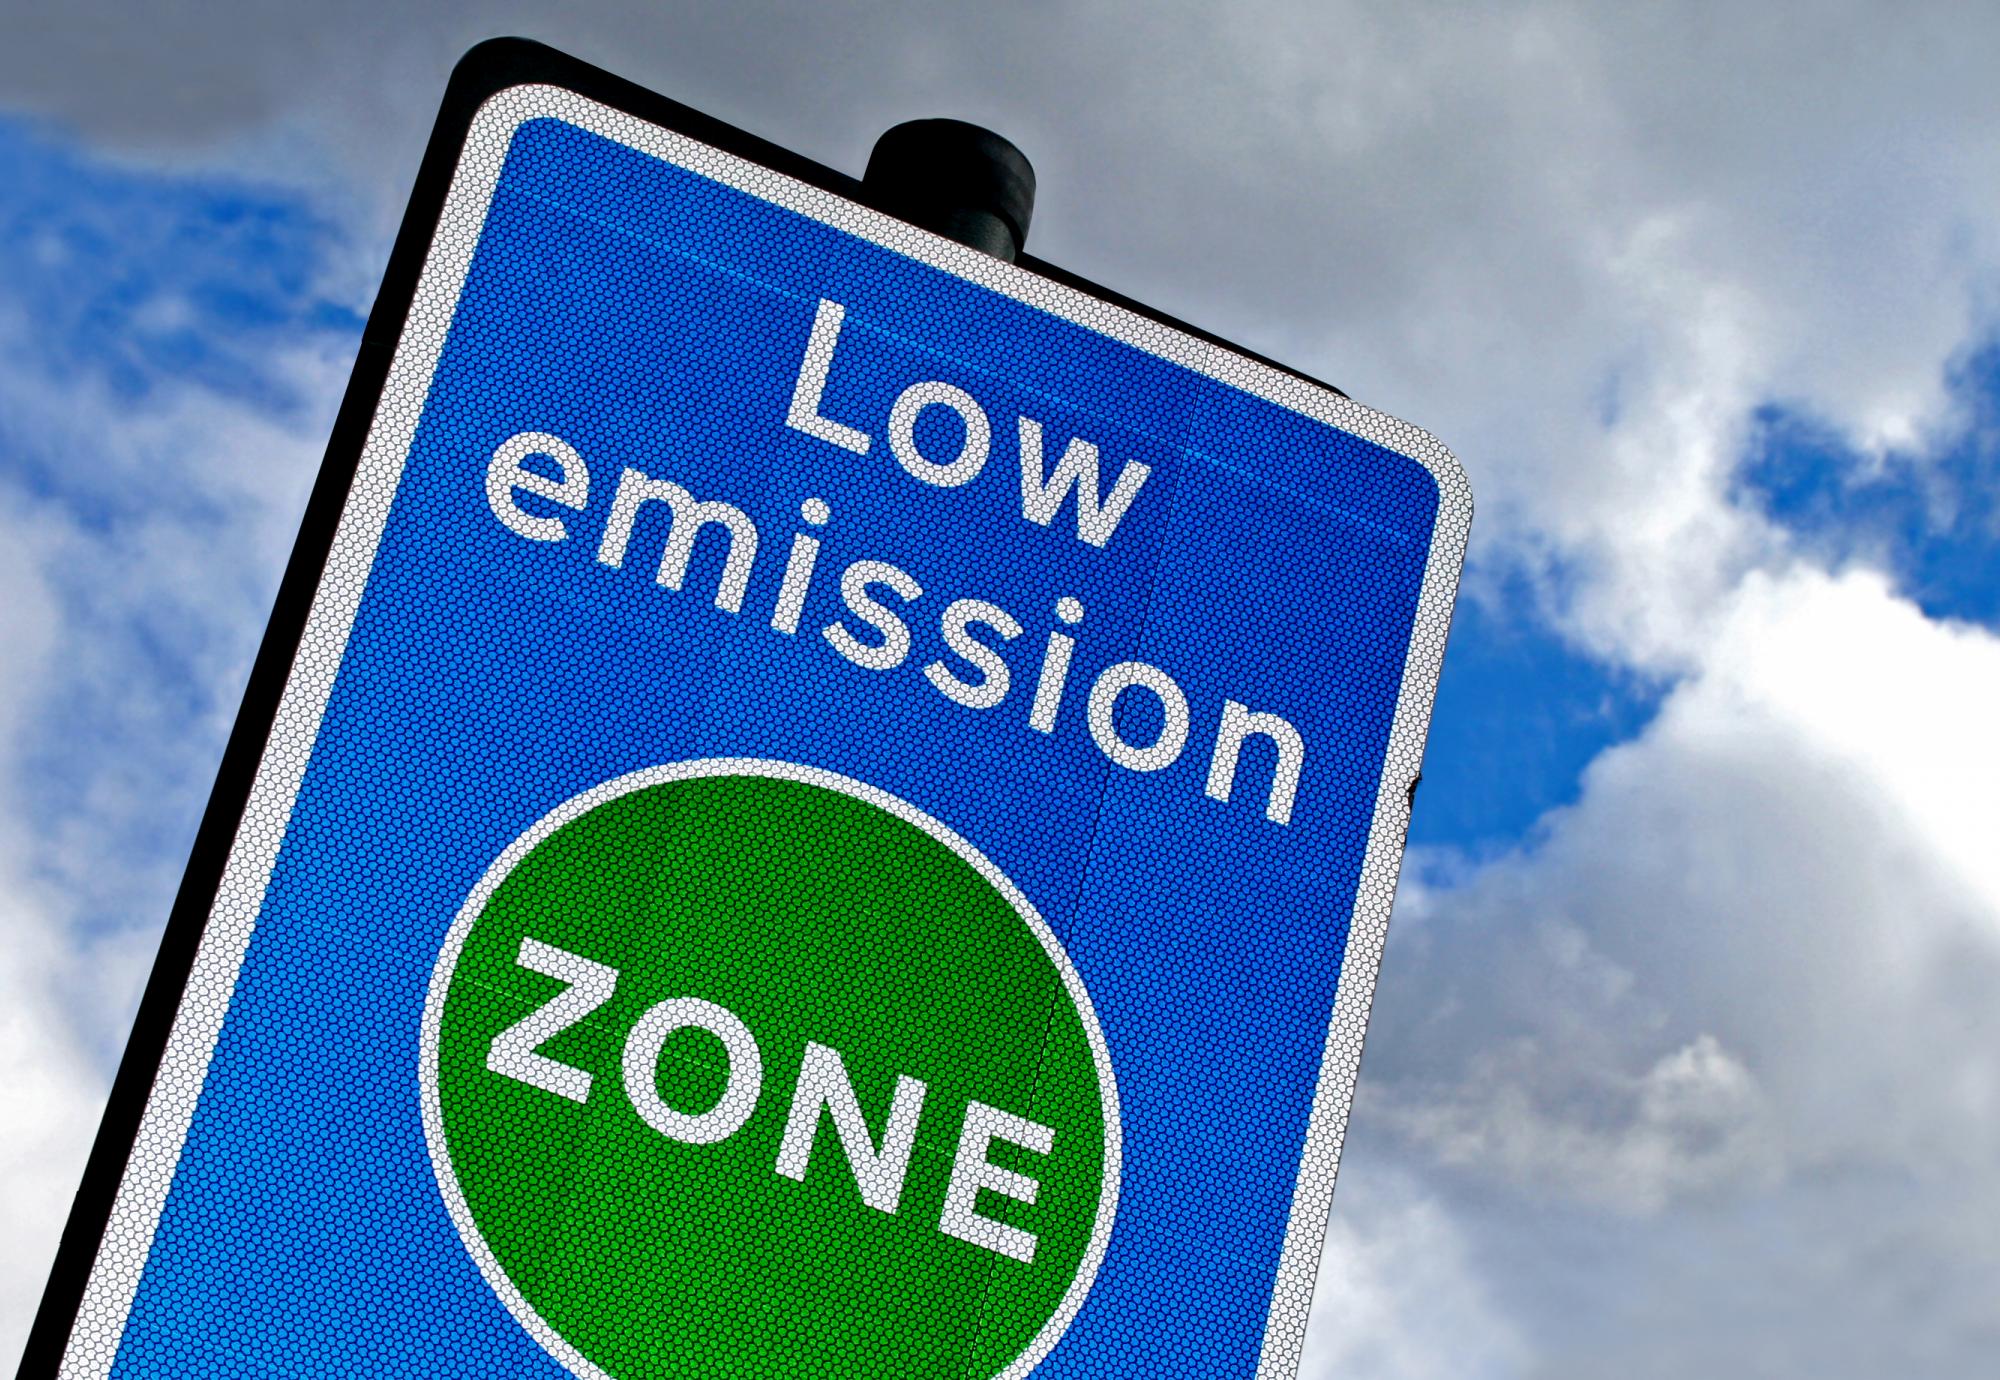 Low emissions zone sign.